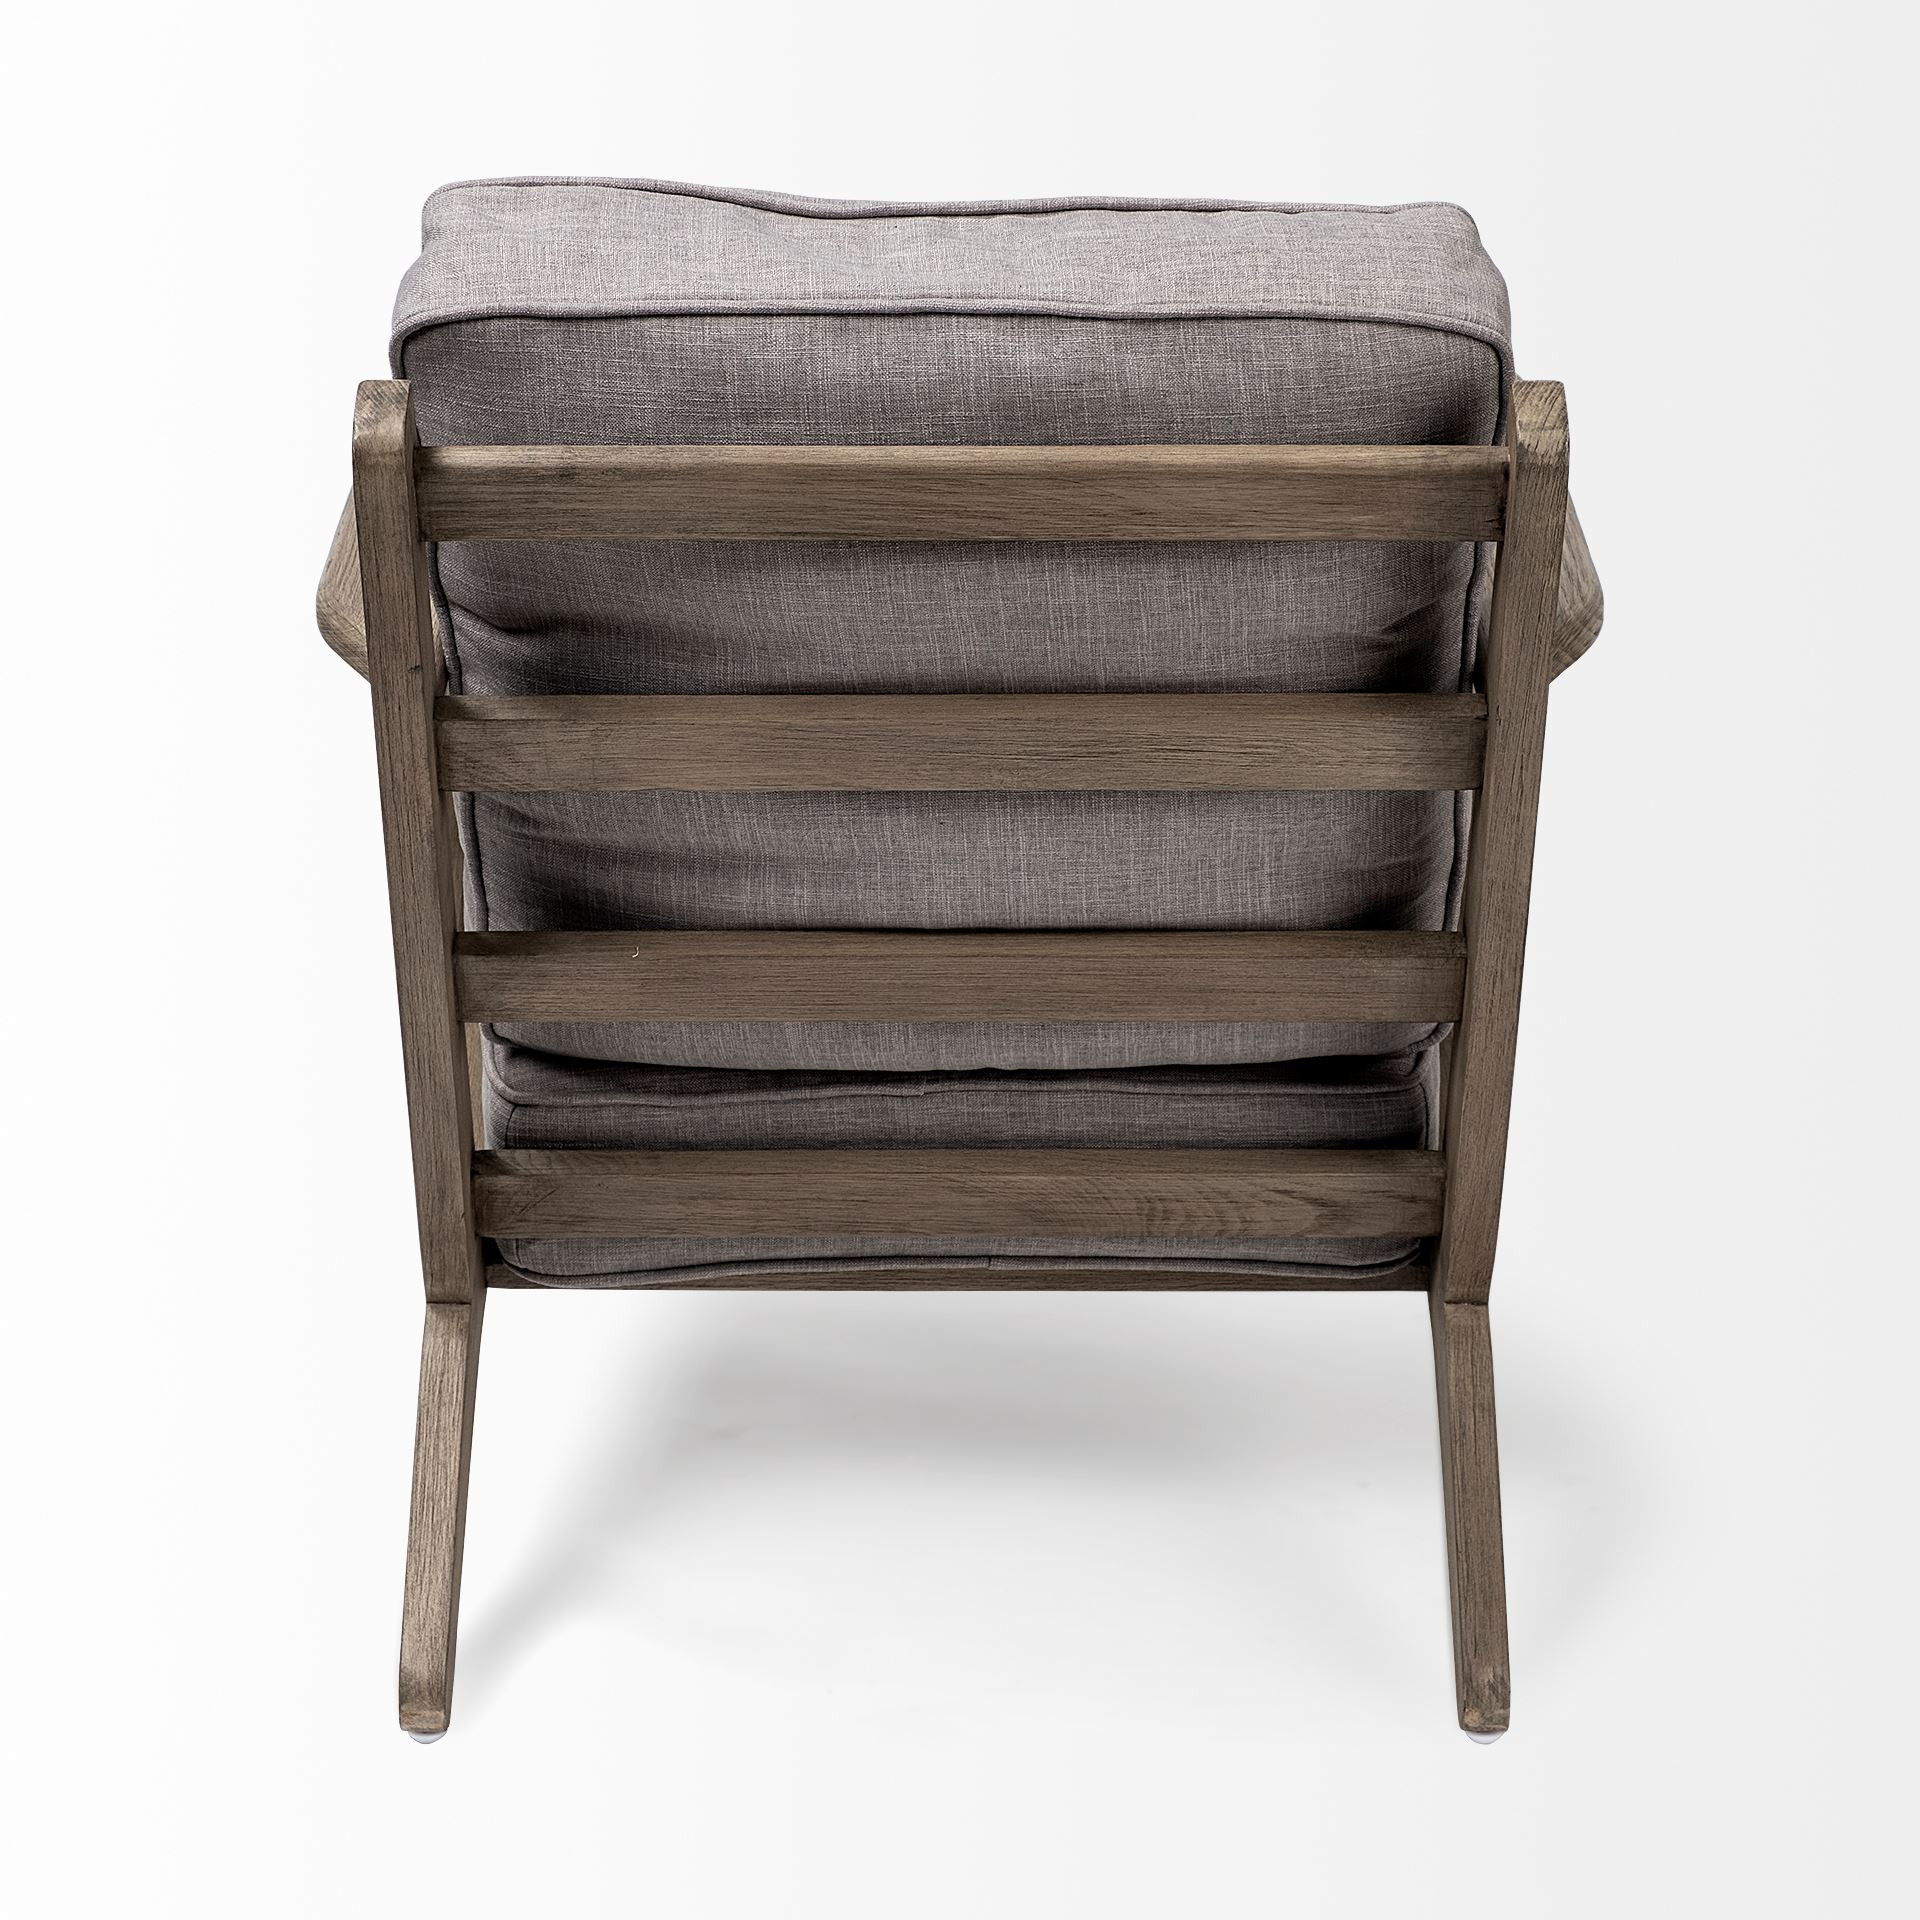 HomeRoots Flint Gray Fabric Accent Chair With Covered Wooden Frame